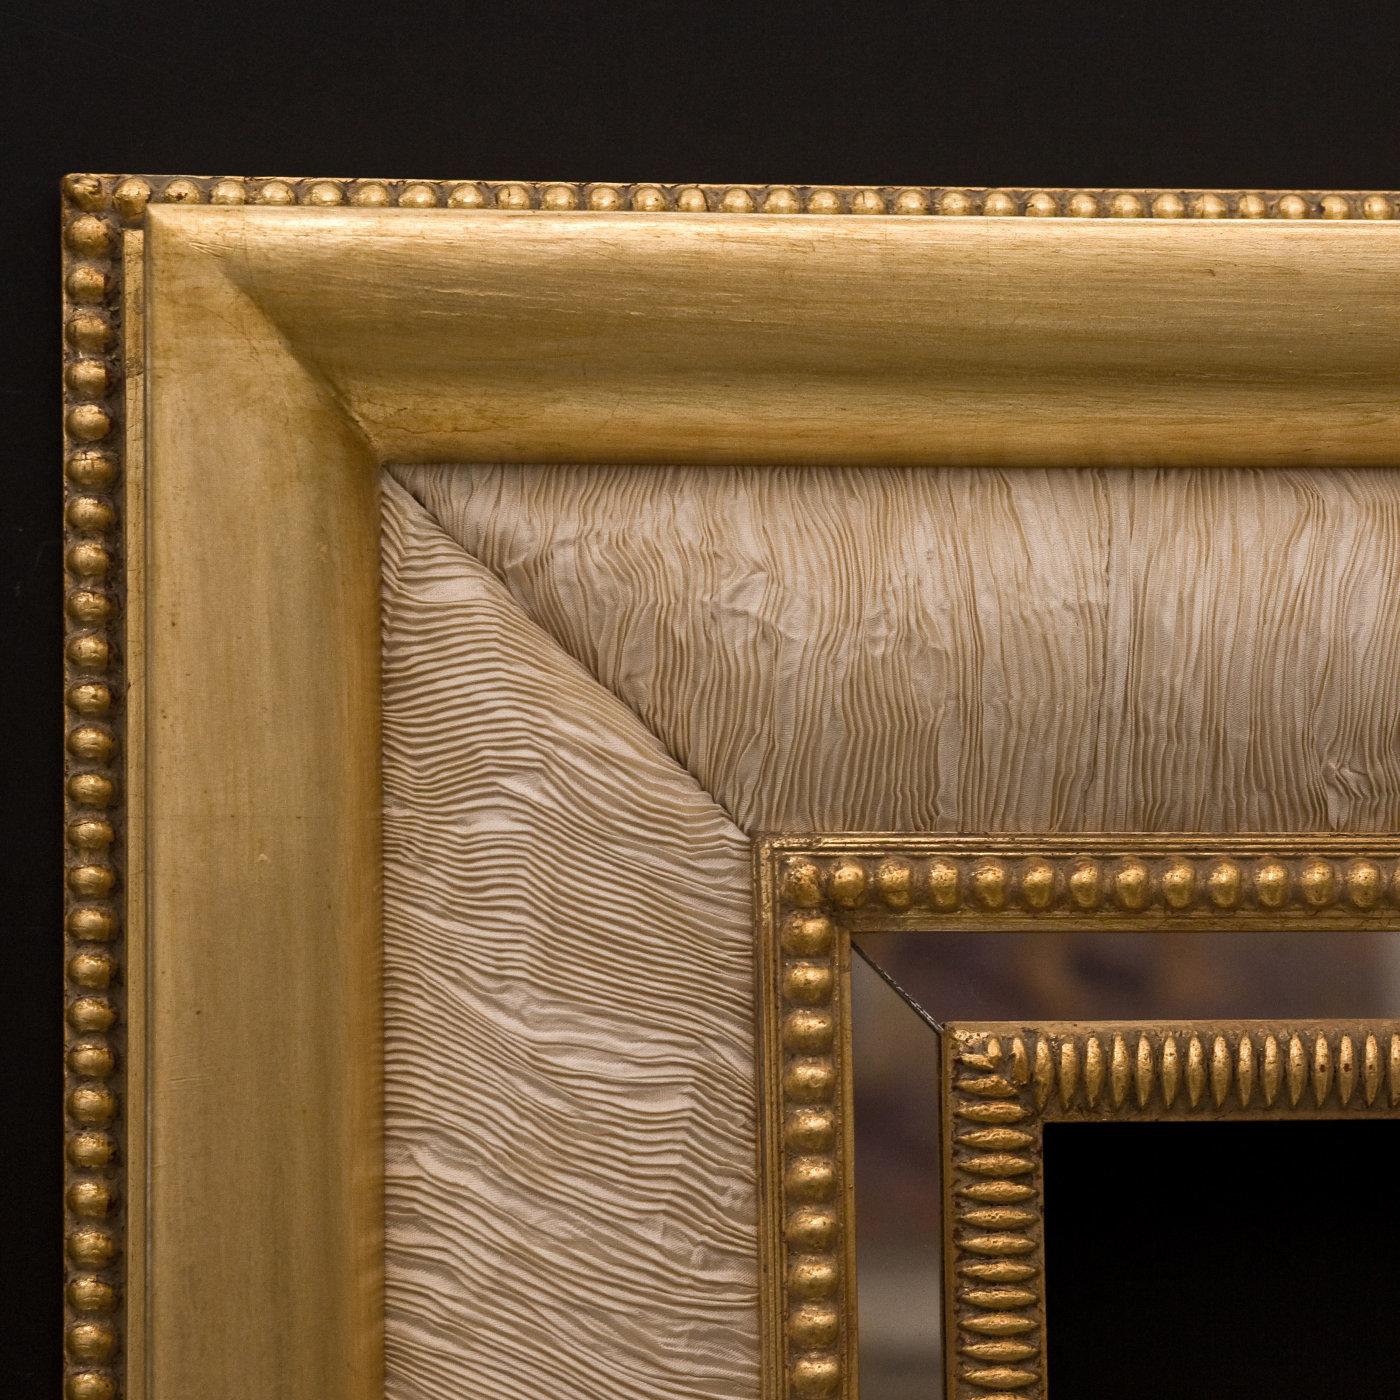 A singular design to enrich an eclectic contemporary interior, this exquisite frame will ideally enclose a fine and luminous mirror. Handcrafted of wood, its rectangular shape is enriched with gold leaf, ivory silk inserts, and smokey mirror